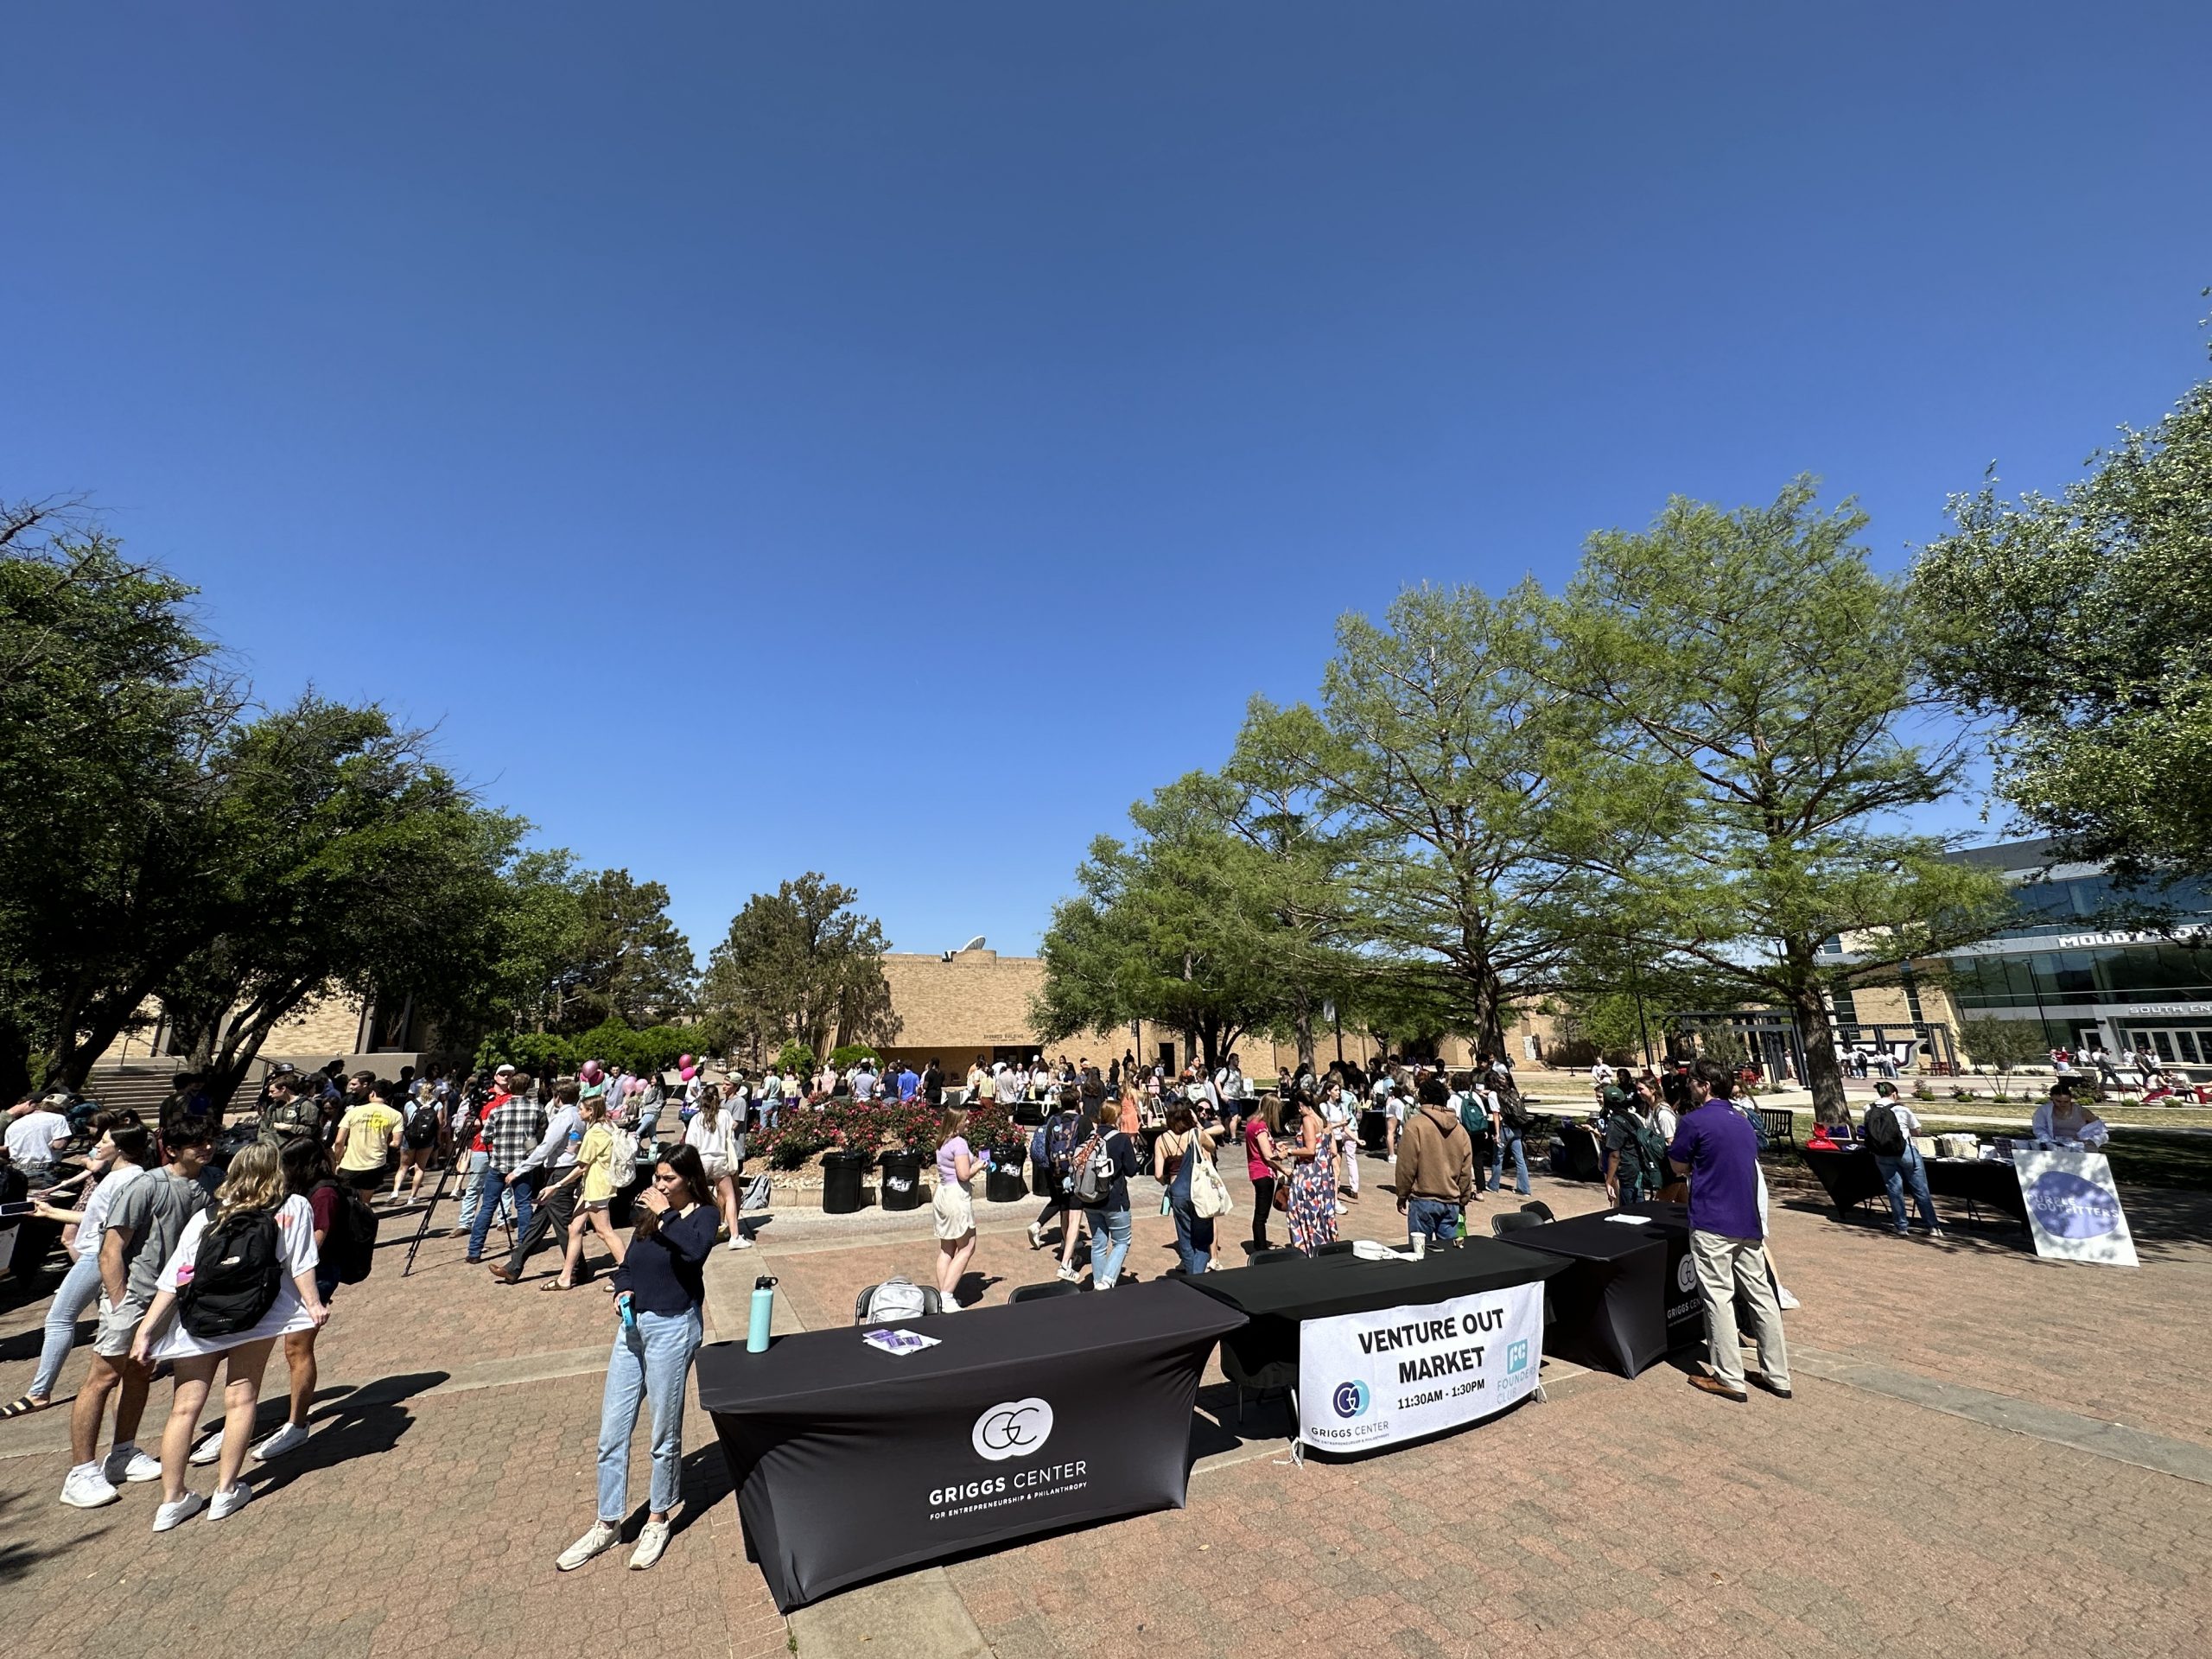 3rd biannual Venture Out market showcases student businesses